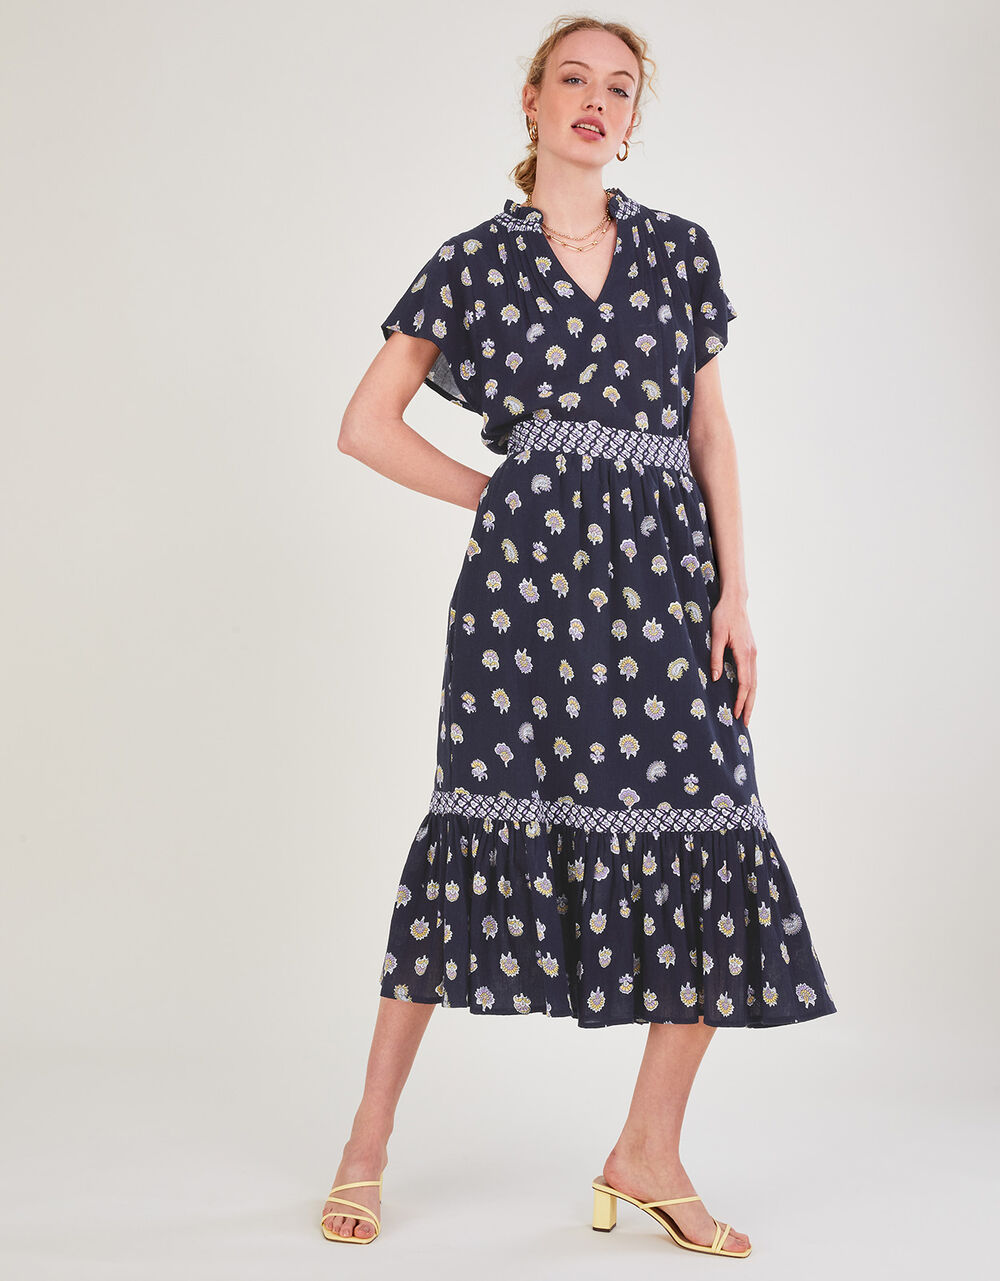 Women Women's Clothing | Floral Print Midi Skirt in Sustainable Cotton Blue - VK61102